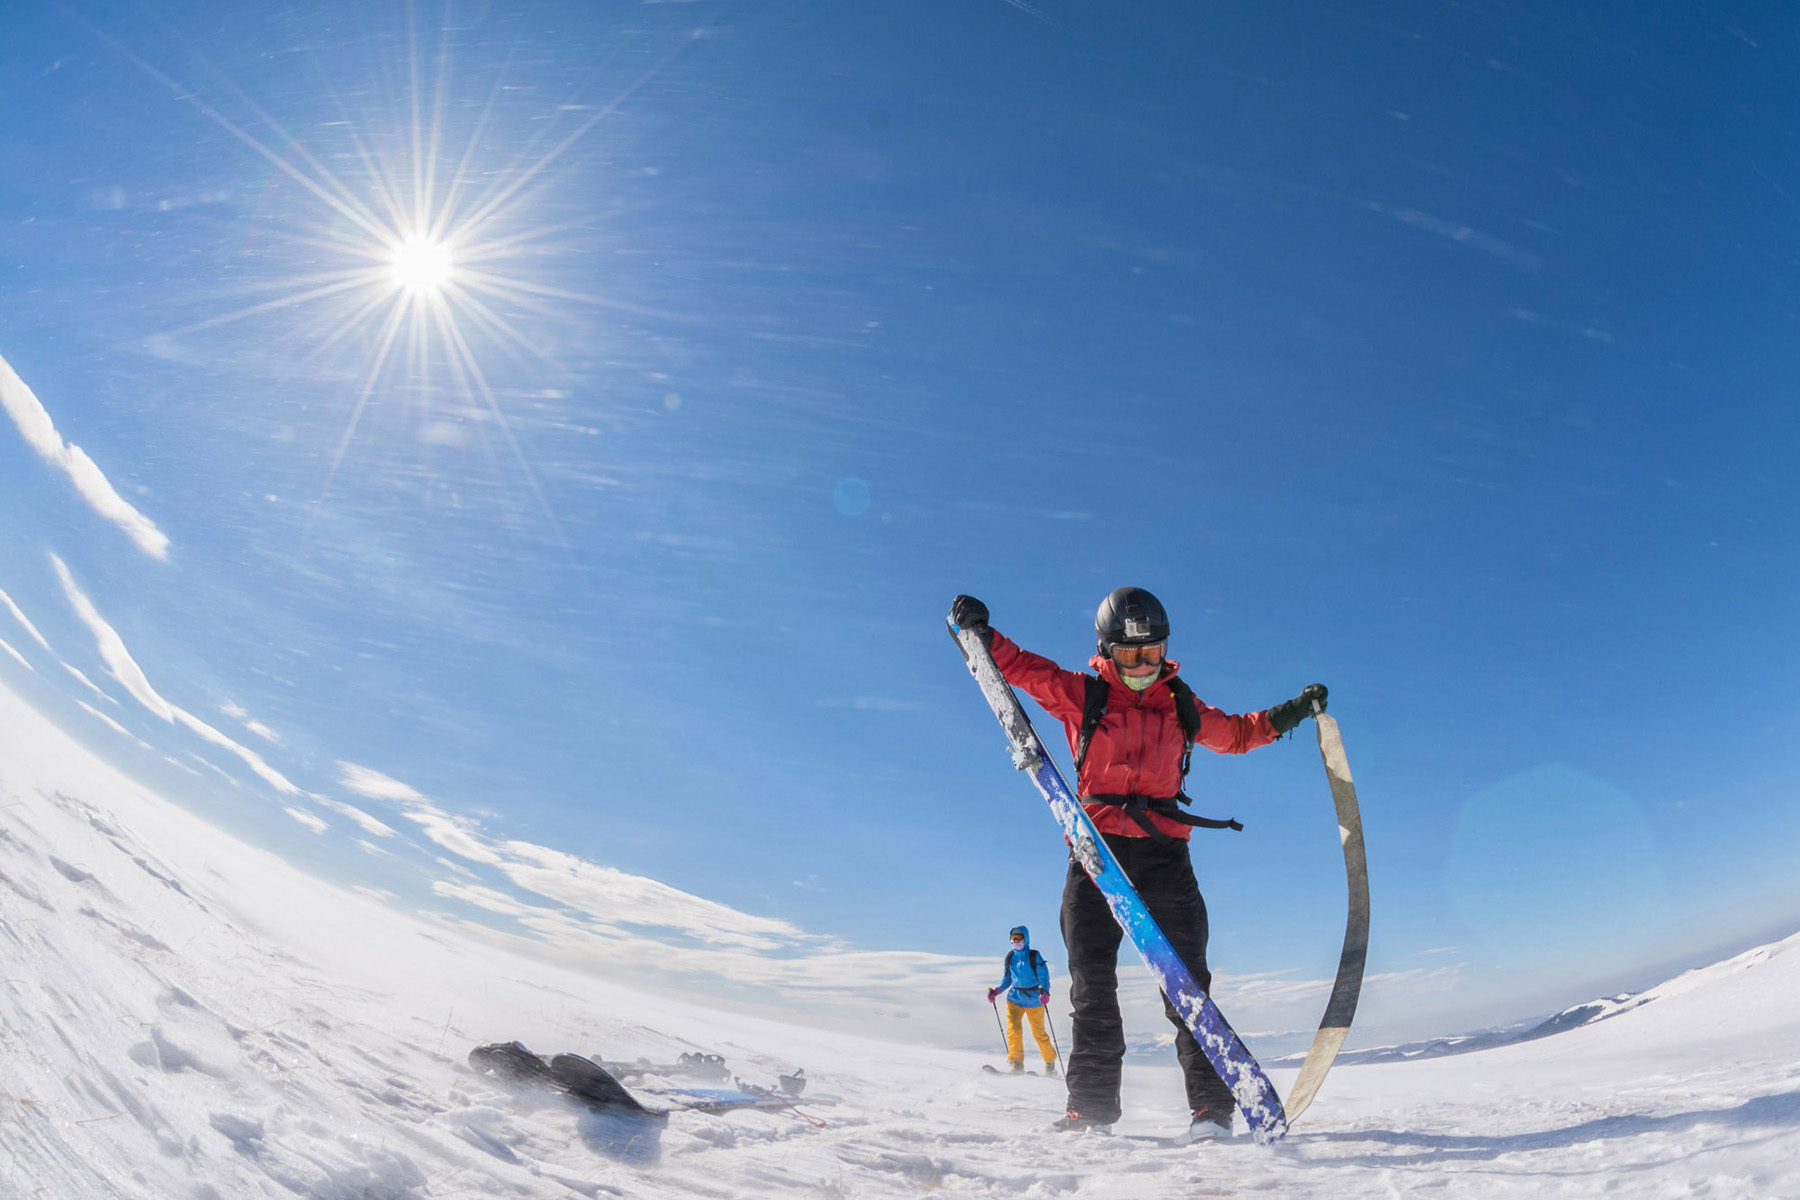 All about ski touring skins: How to choose and use them?